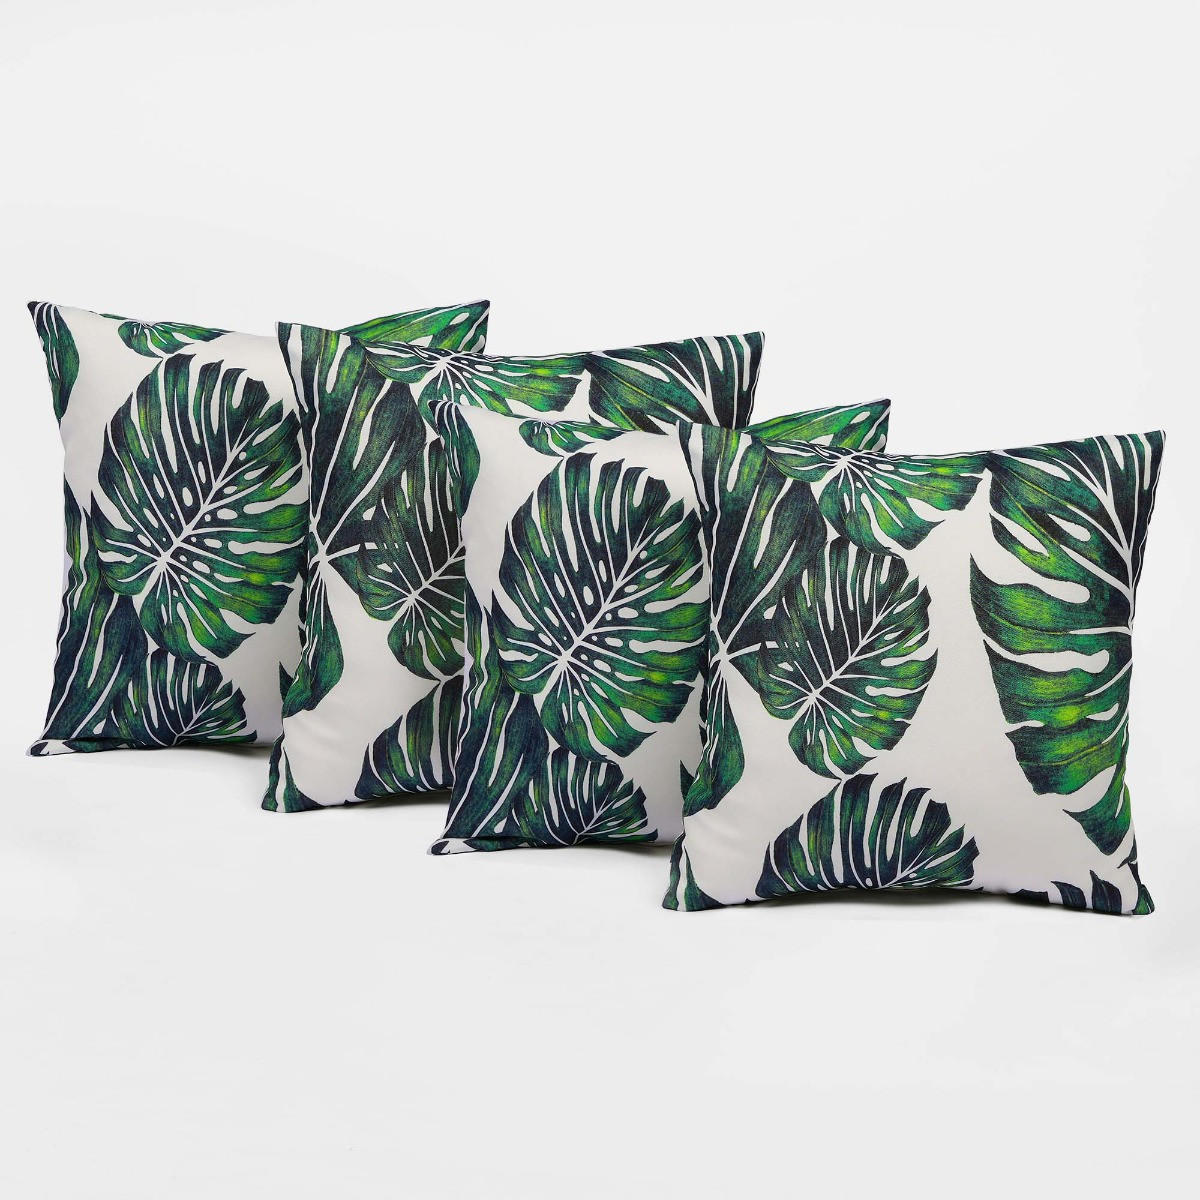 OHS Tropical Print Water Resistant Outdoor Cushion Covers - Green/White>